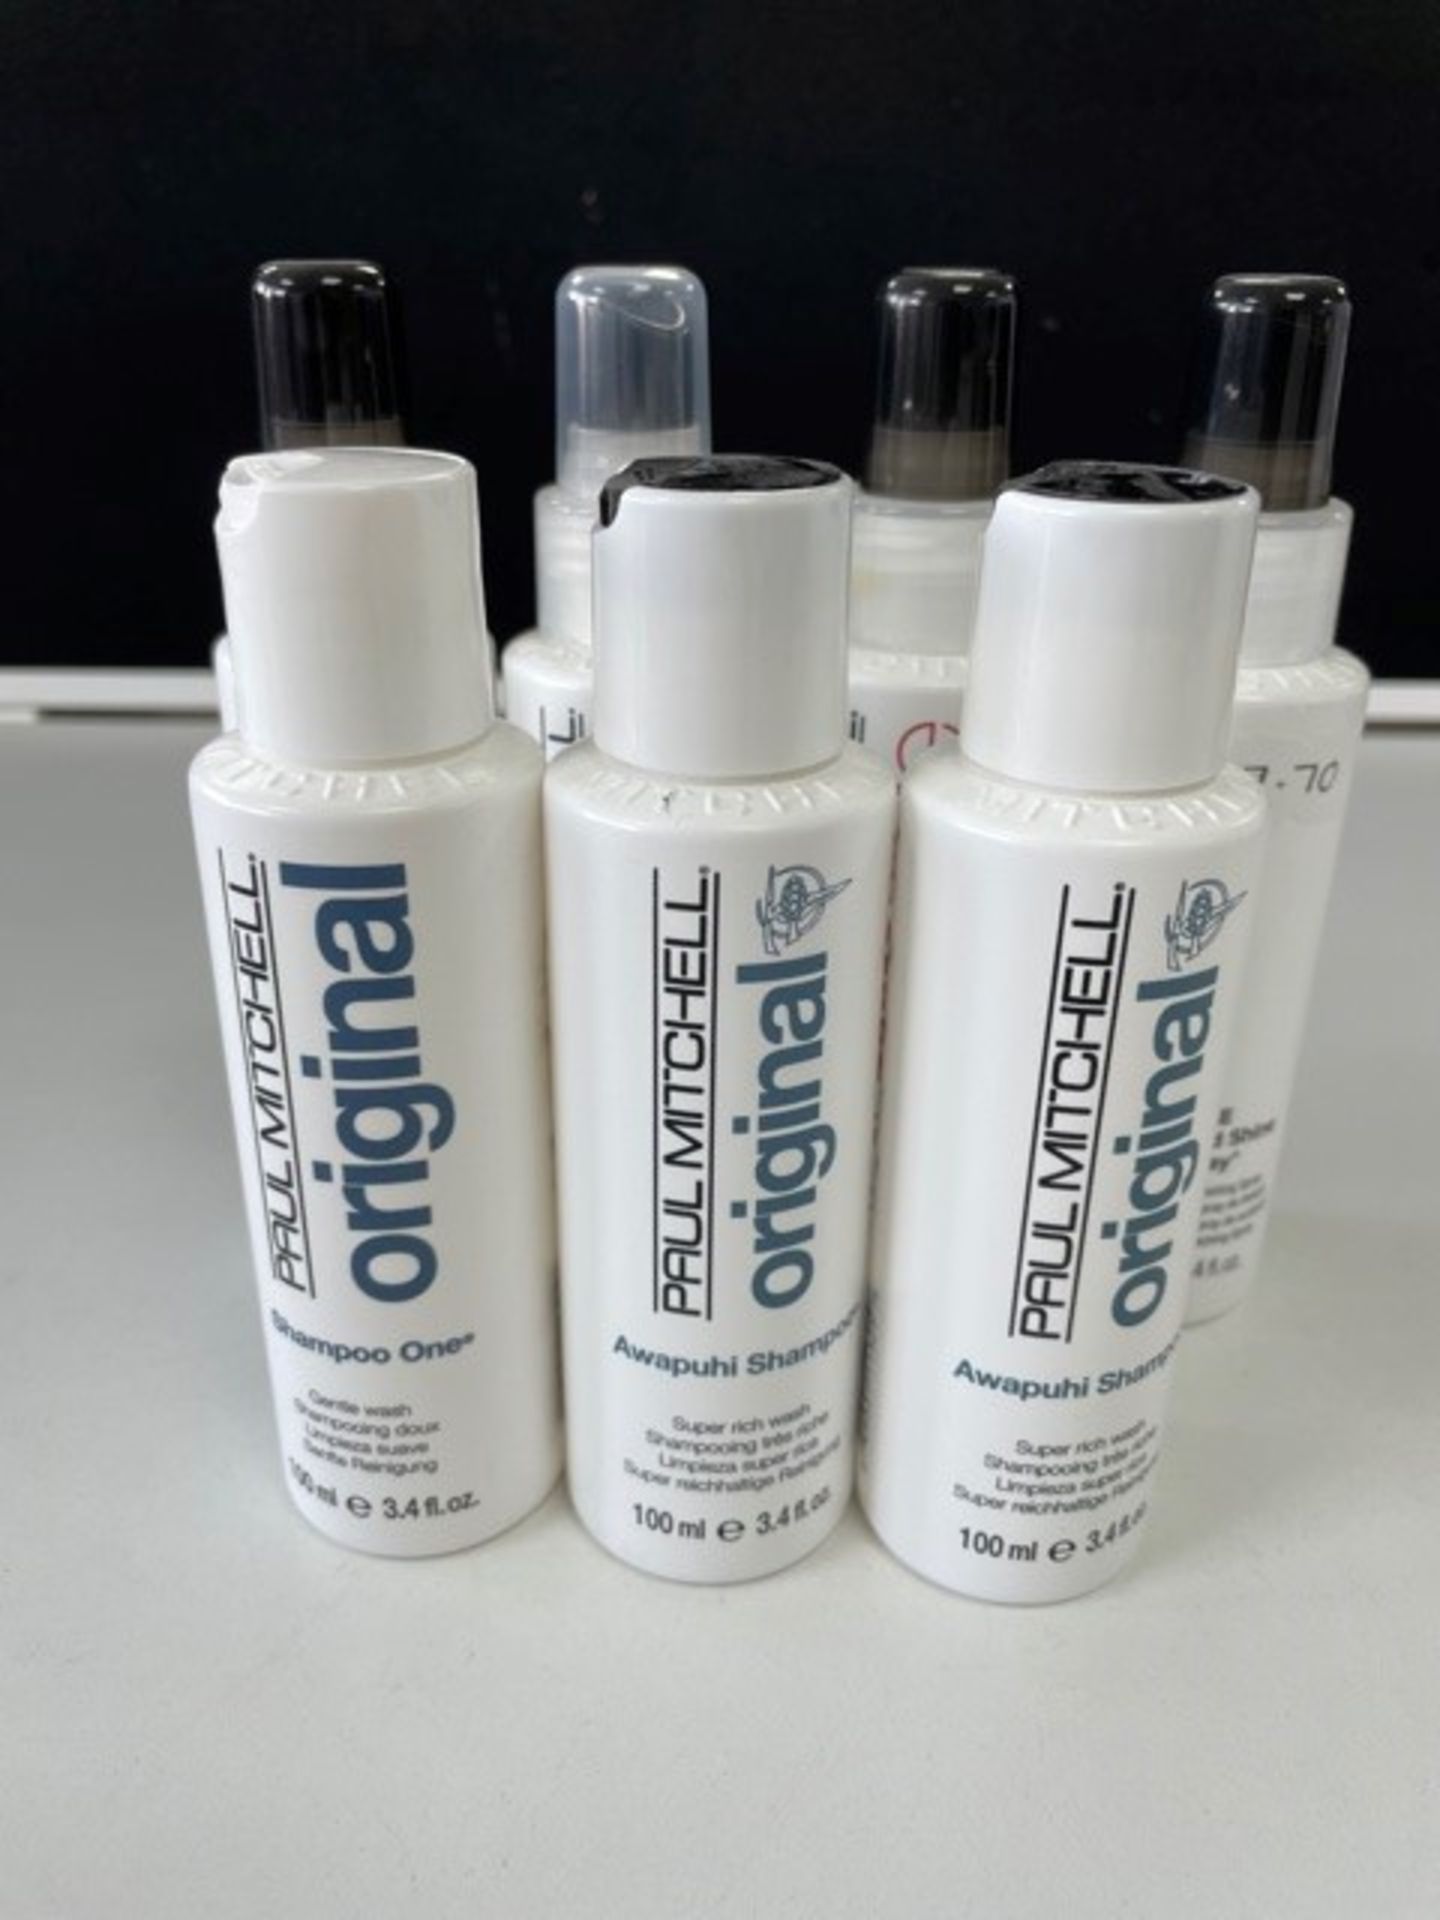 7 x Paul Mitchell hair care products | See description | Total RRP £52.56